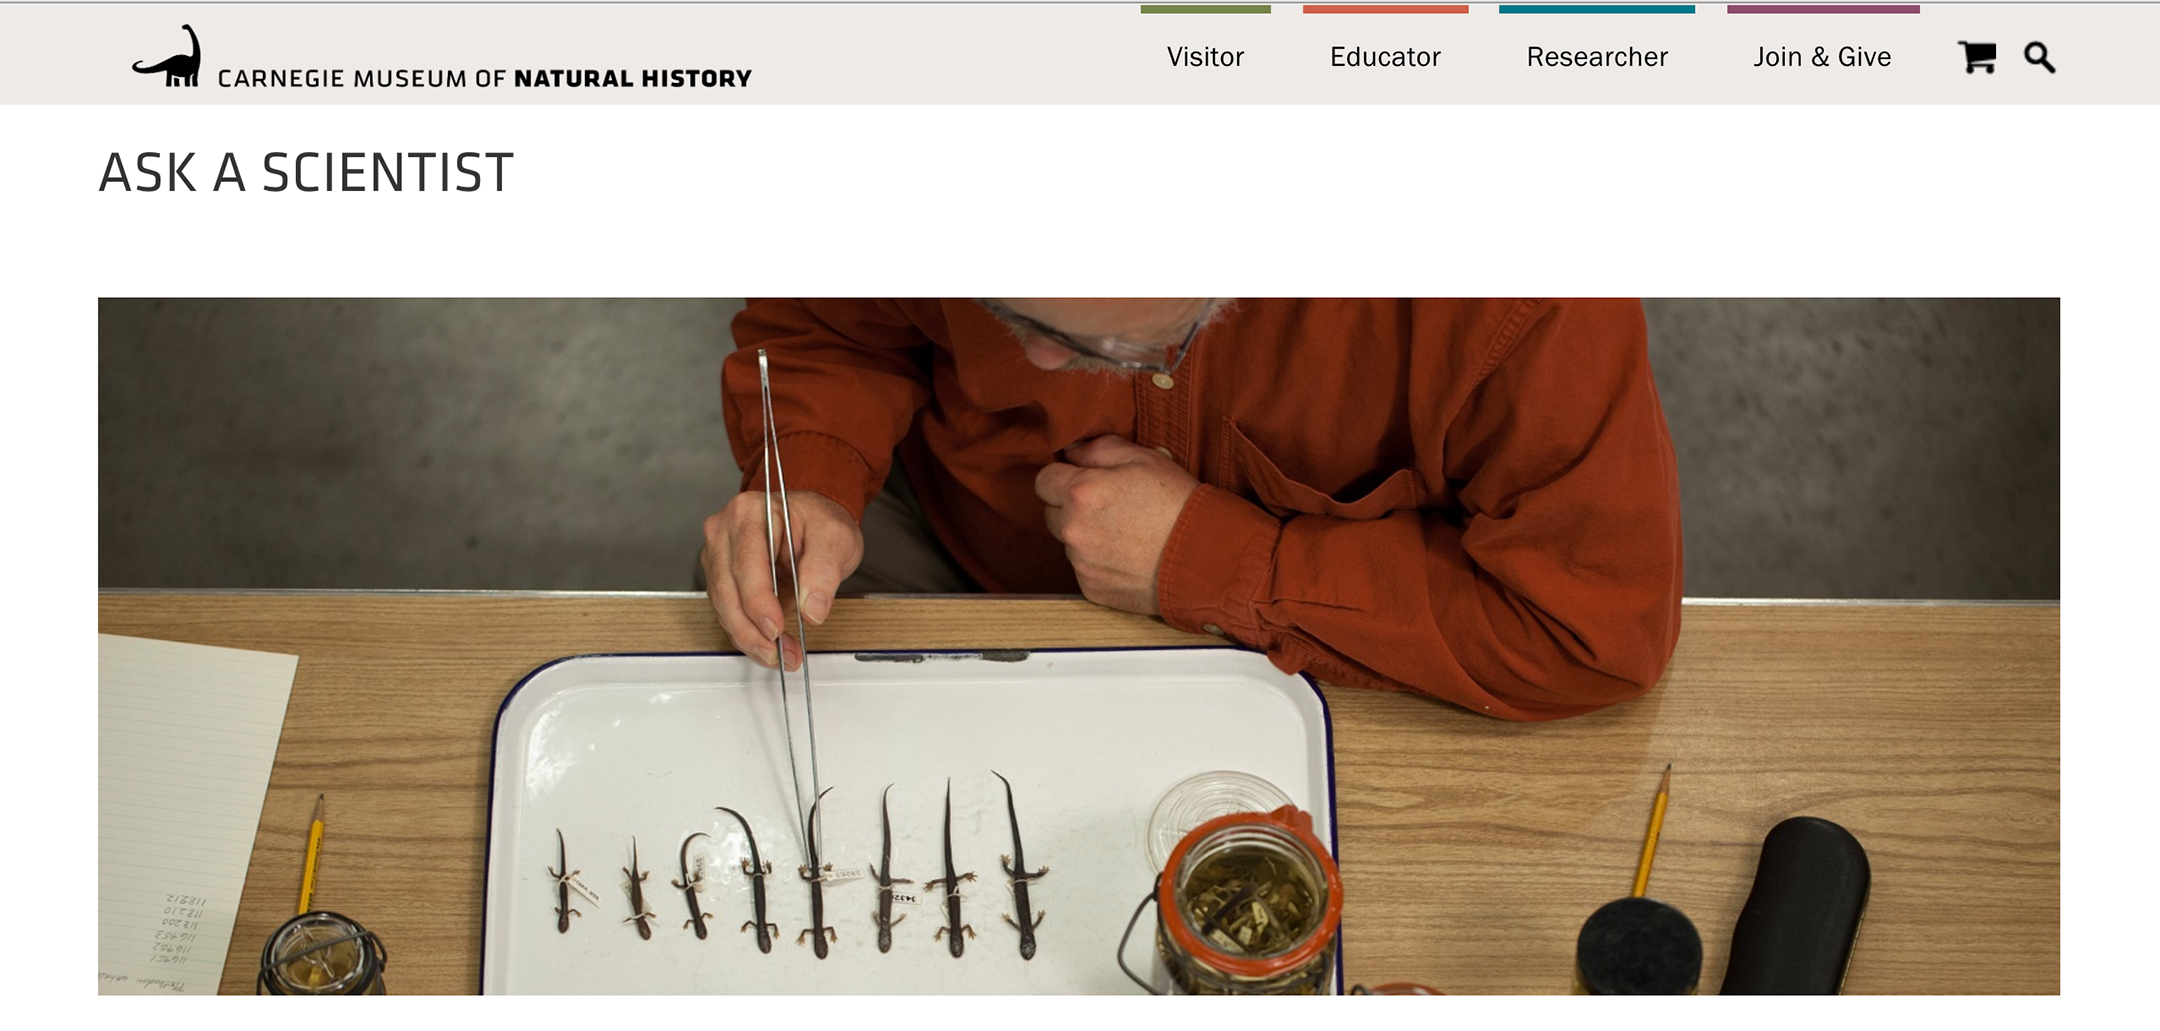 screenshot from the carnegie museum of natural history's ask a scientist website, showing a scientist inspecting numerous salamander specimens